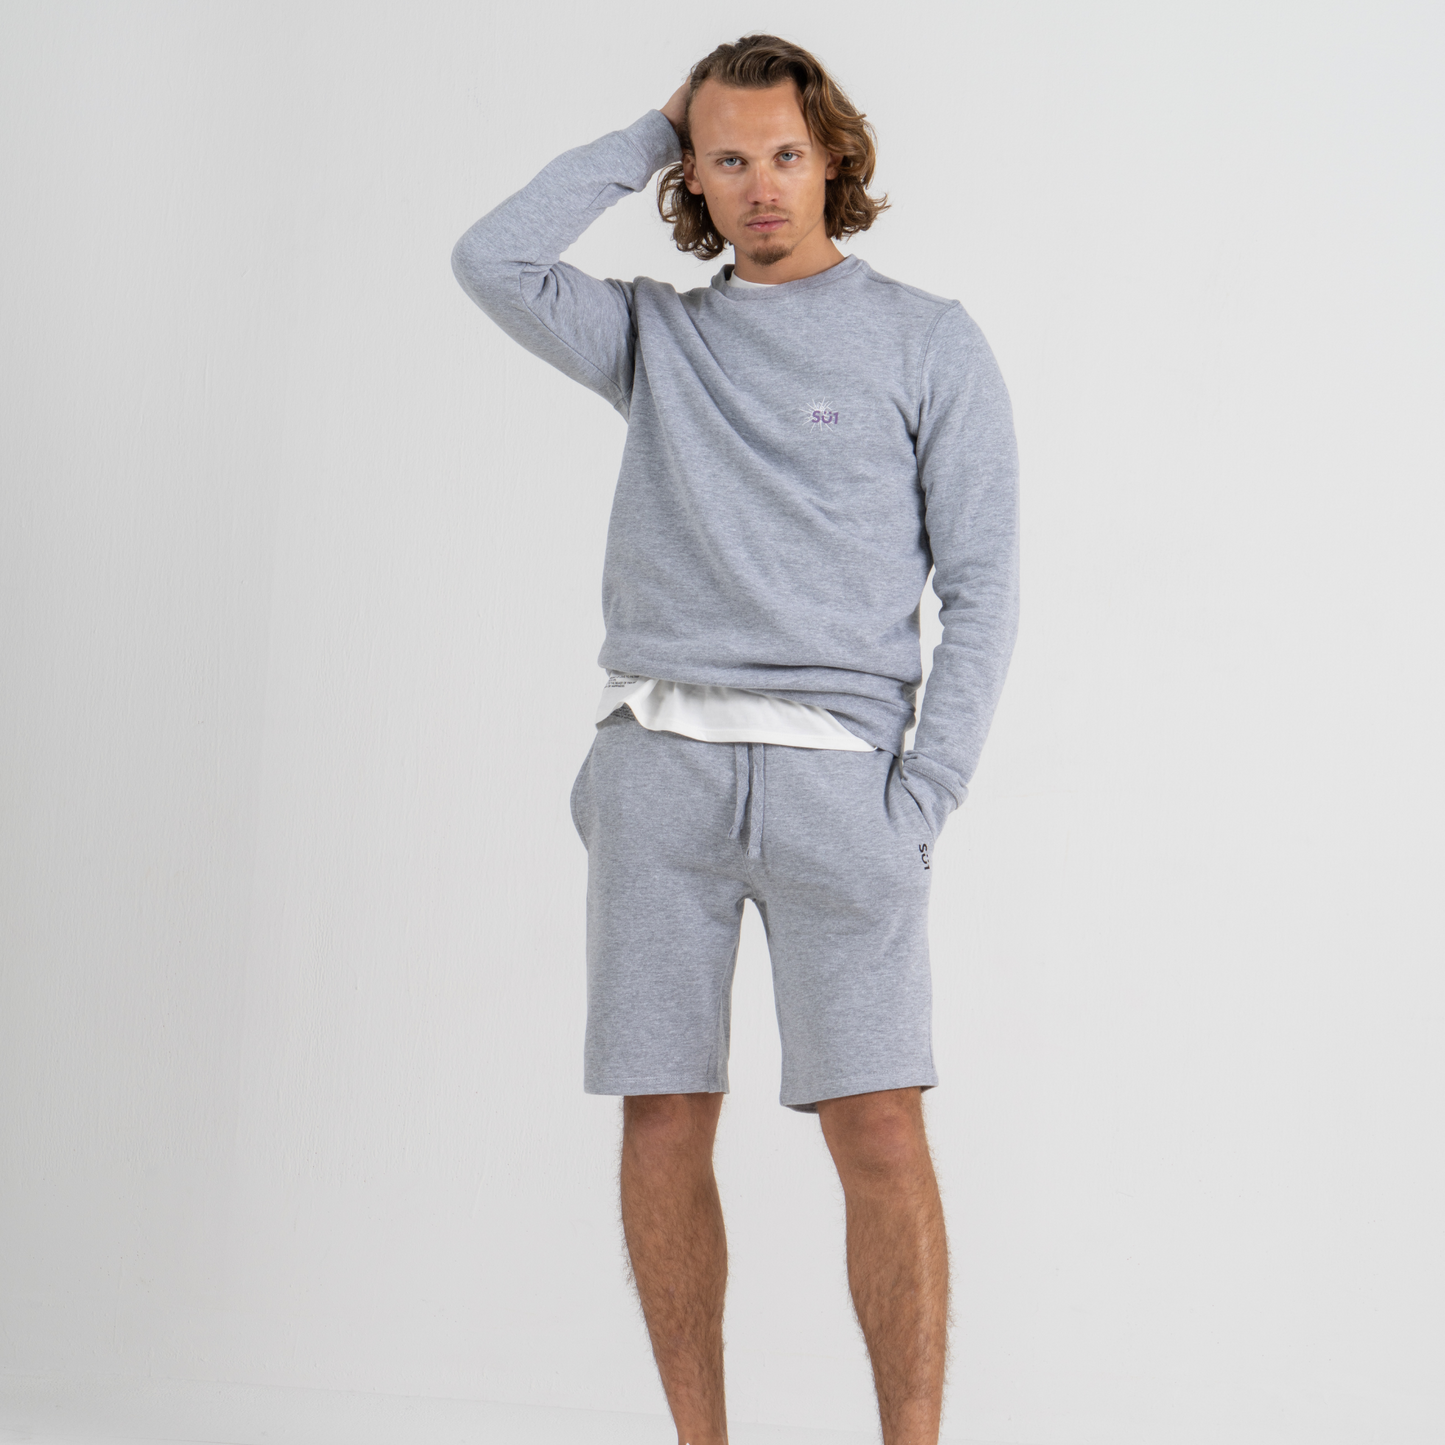 Man wearing grey sport shorts SU1 brand clothing and sweater